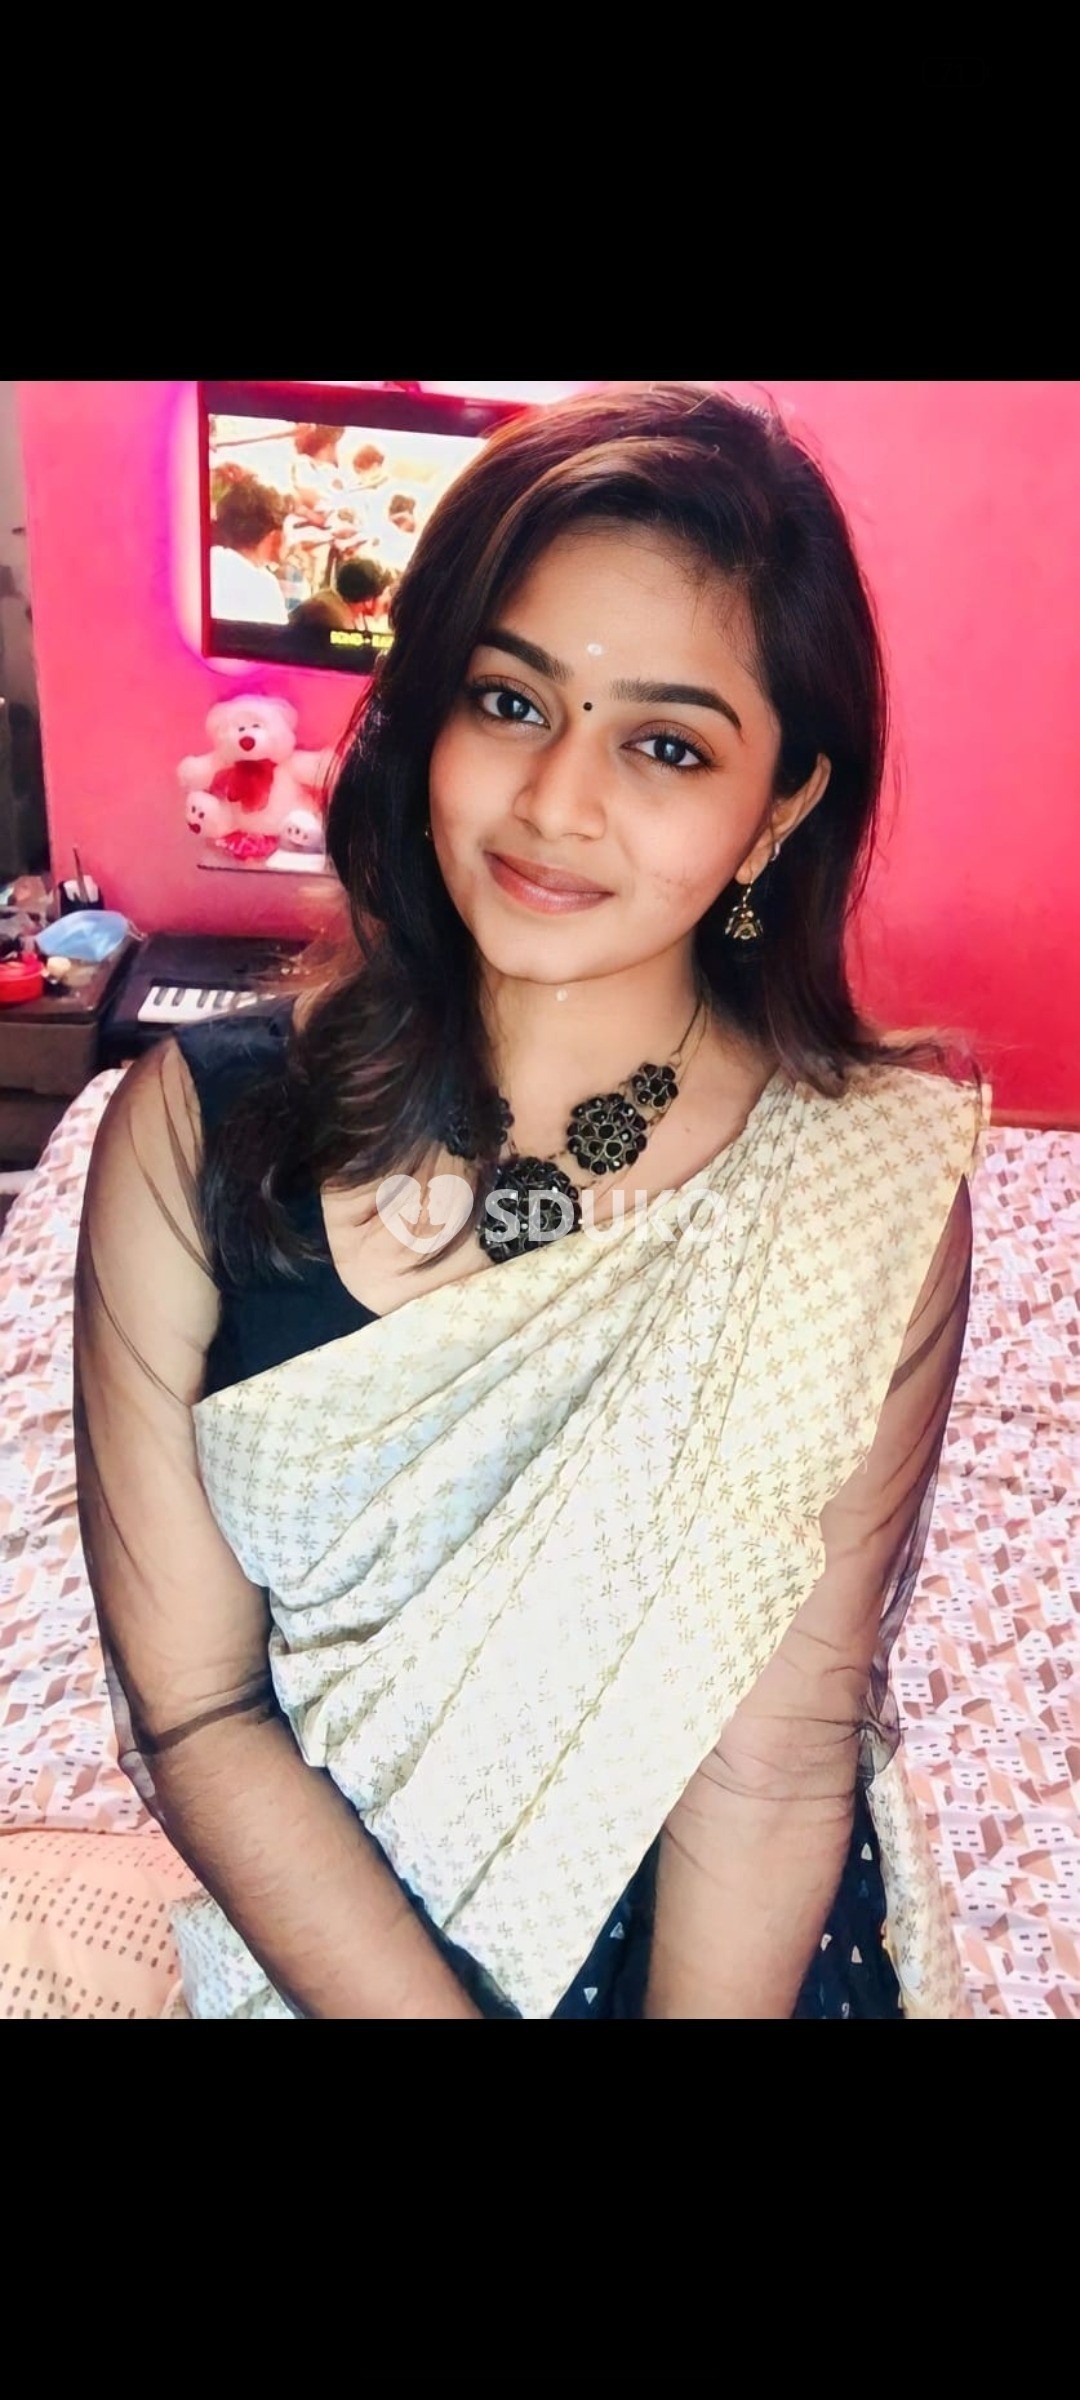 Ooty ✅ MYSELF VIDYA ☎️ ESCORT SERVICE TAMIL INDIPENDENT DOORSTEP GIRL HOUSEWIFE COLLEGE FULL SAFE AND SECURE SECUR